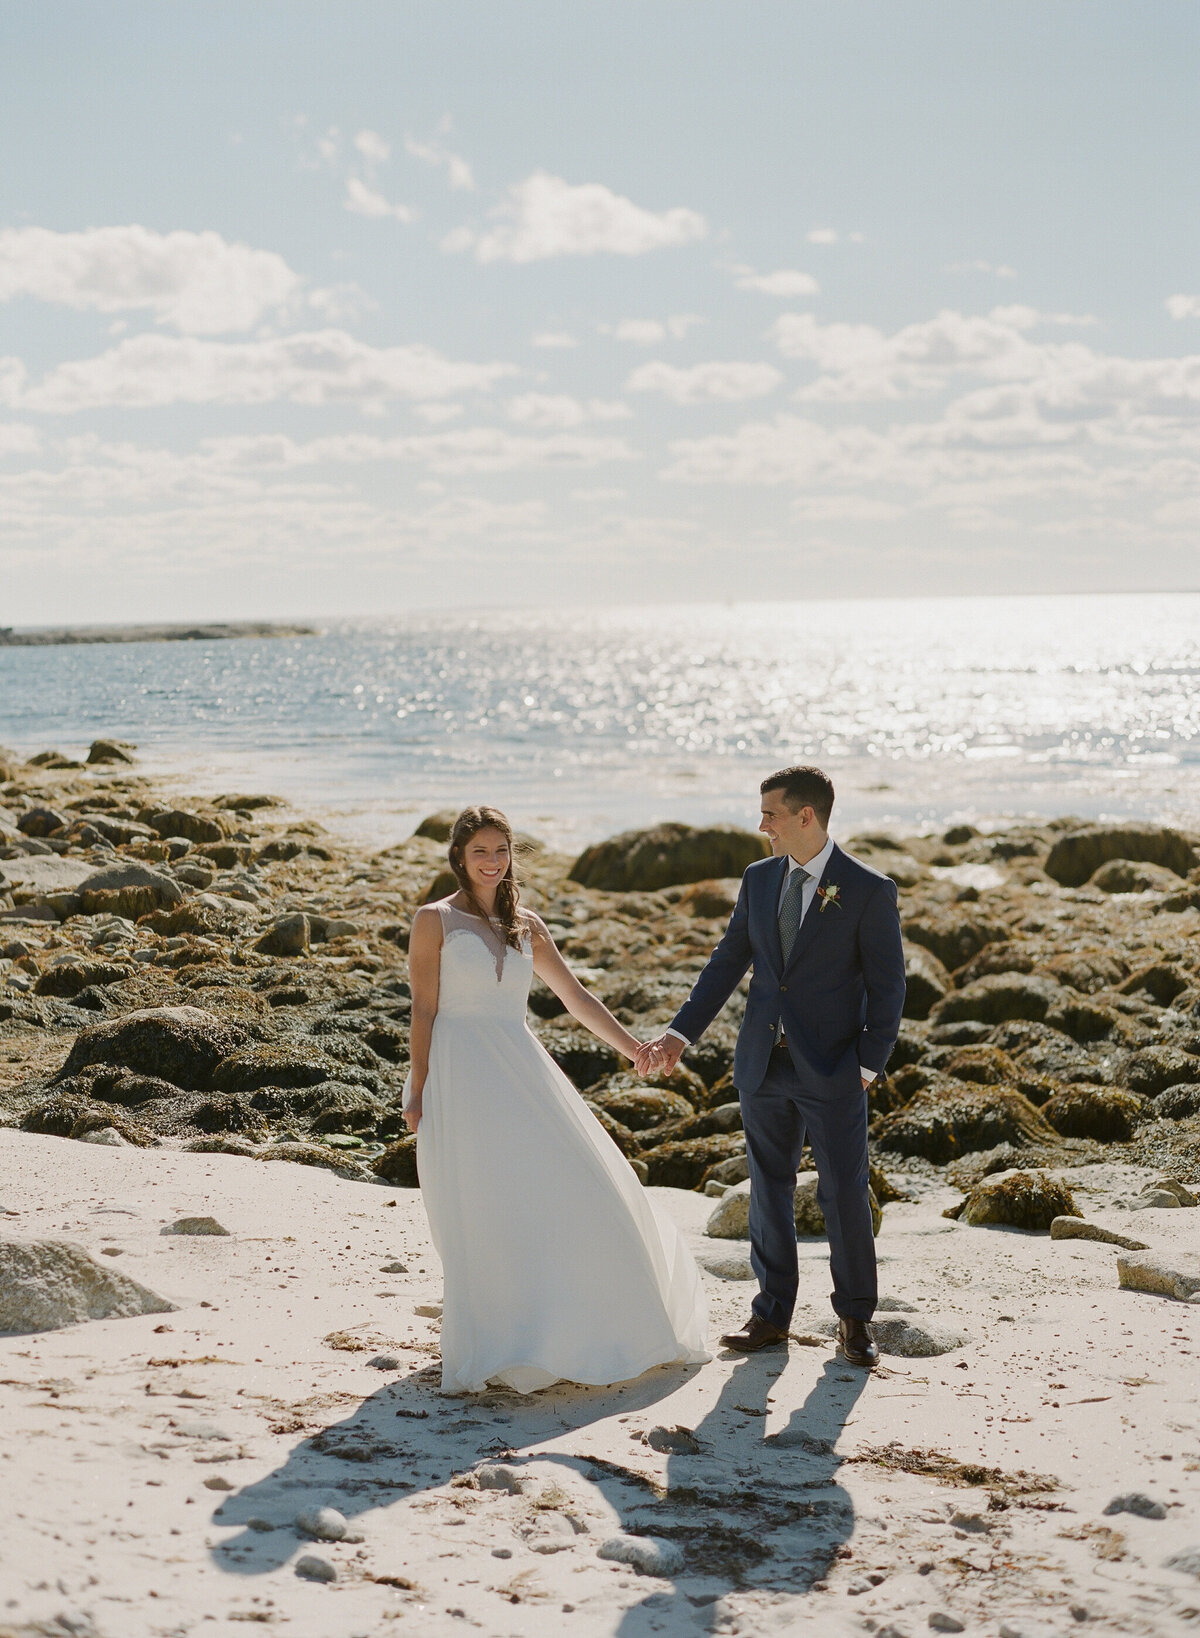 Jacqueline Anne Photography - Halifax Wedding Photographer - Jaclyn and Morgan-27